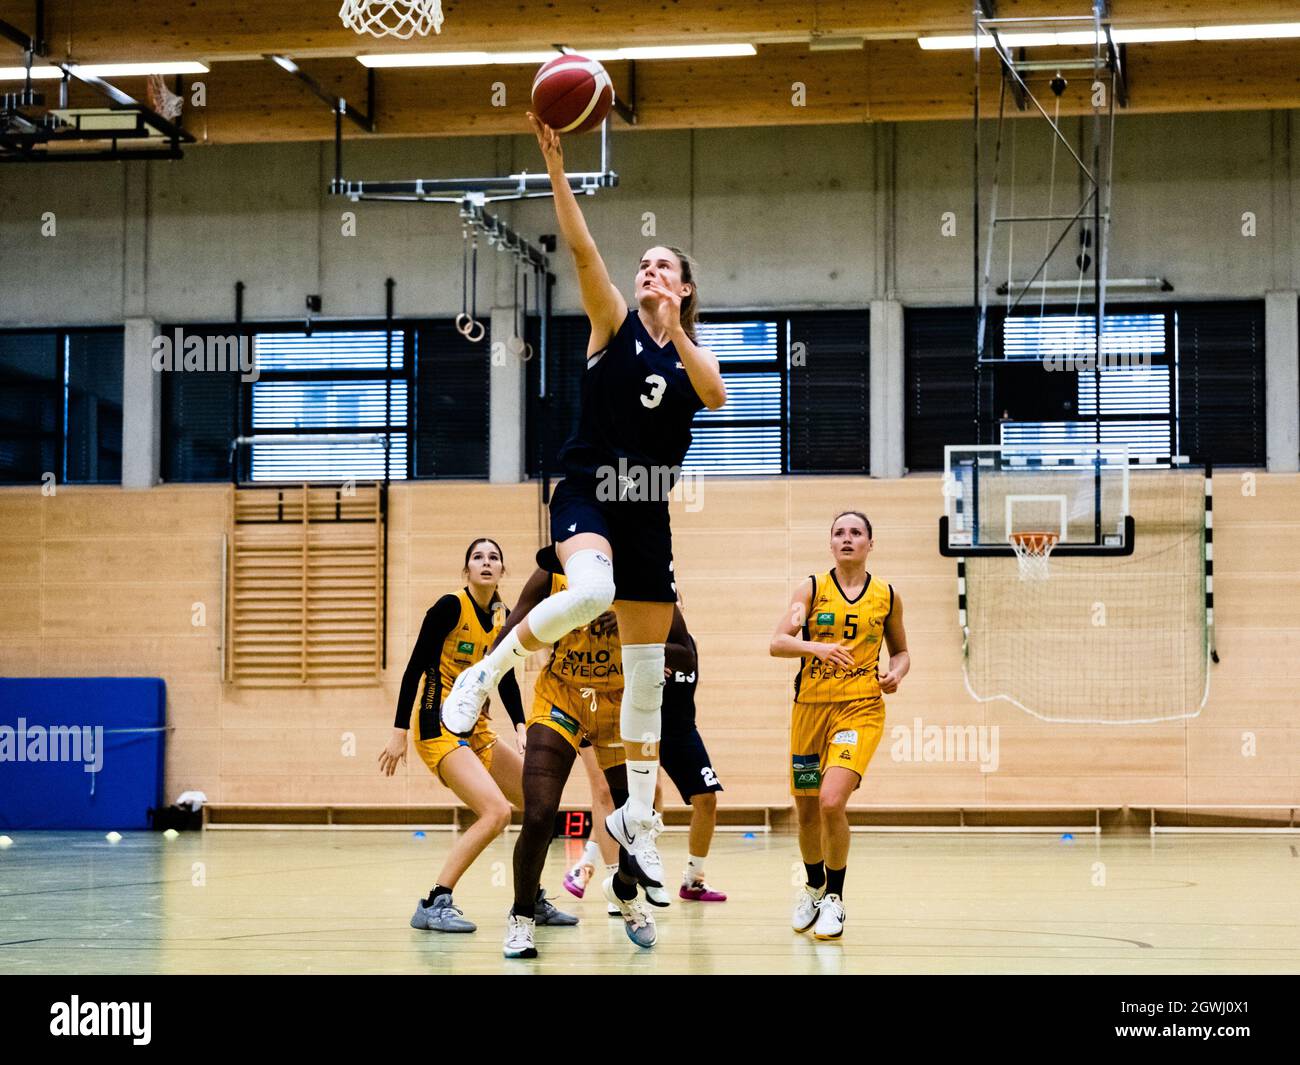 Duesseldorf, Germany. 03rd Oct, 2021. Simone Sill ( 3 Capitol Bascats )  scores two points during the 1. Toyota Damen Basketball Bundesliga game  between the Capitol Bascats Duesseldorf and inexio Royals Saarlouis